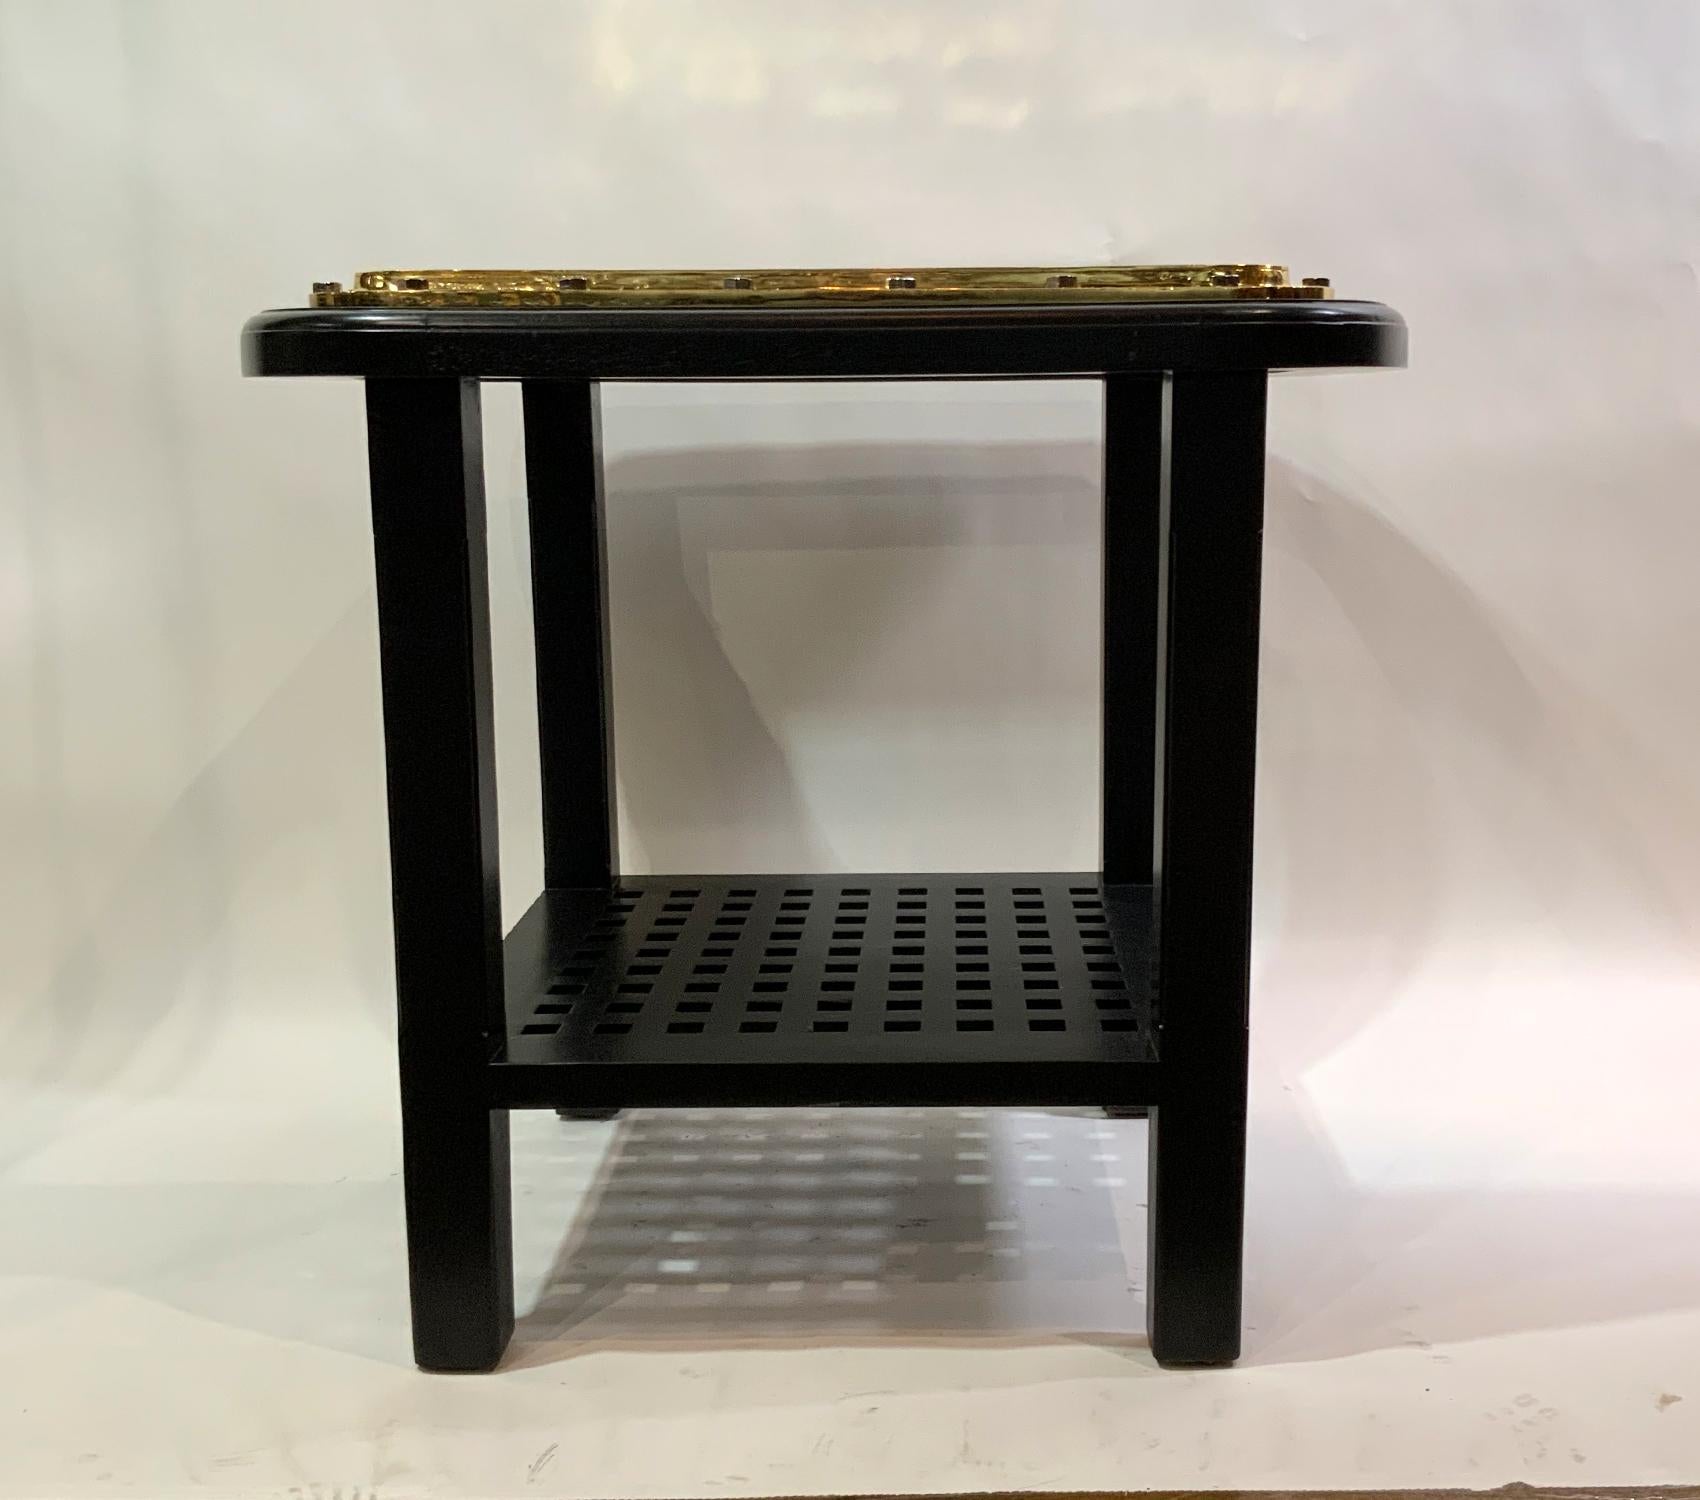 Solid brass ships porthole table. Meticulously polished and lacquered authentic ships porthole that has been fitted to a custom-built bistro table with a ships grating and four tapered legs.

Weight: 93 LBS
Overall Dimensions: 31” H x 35